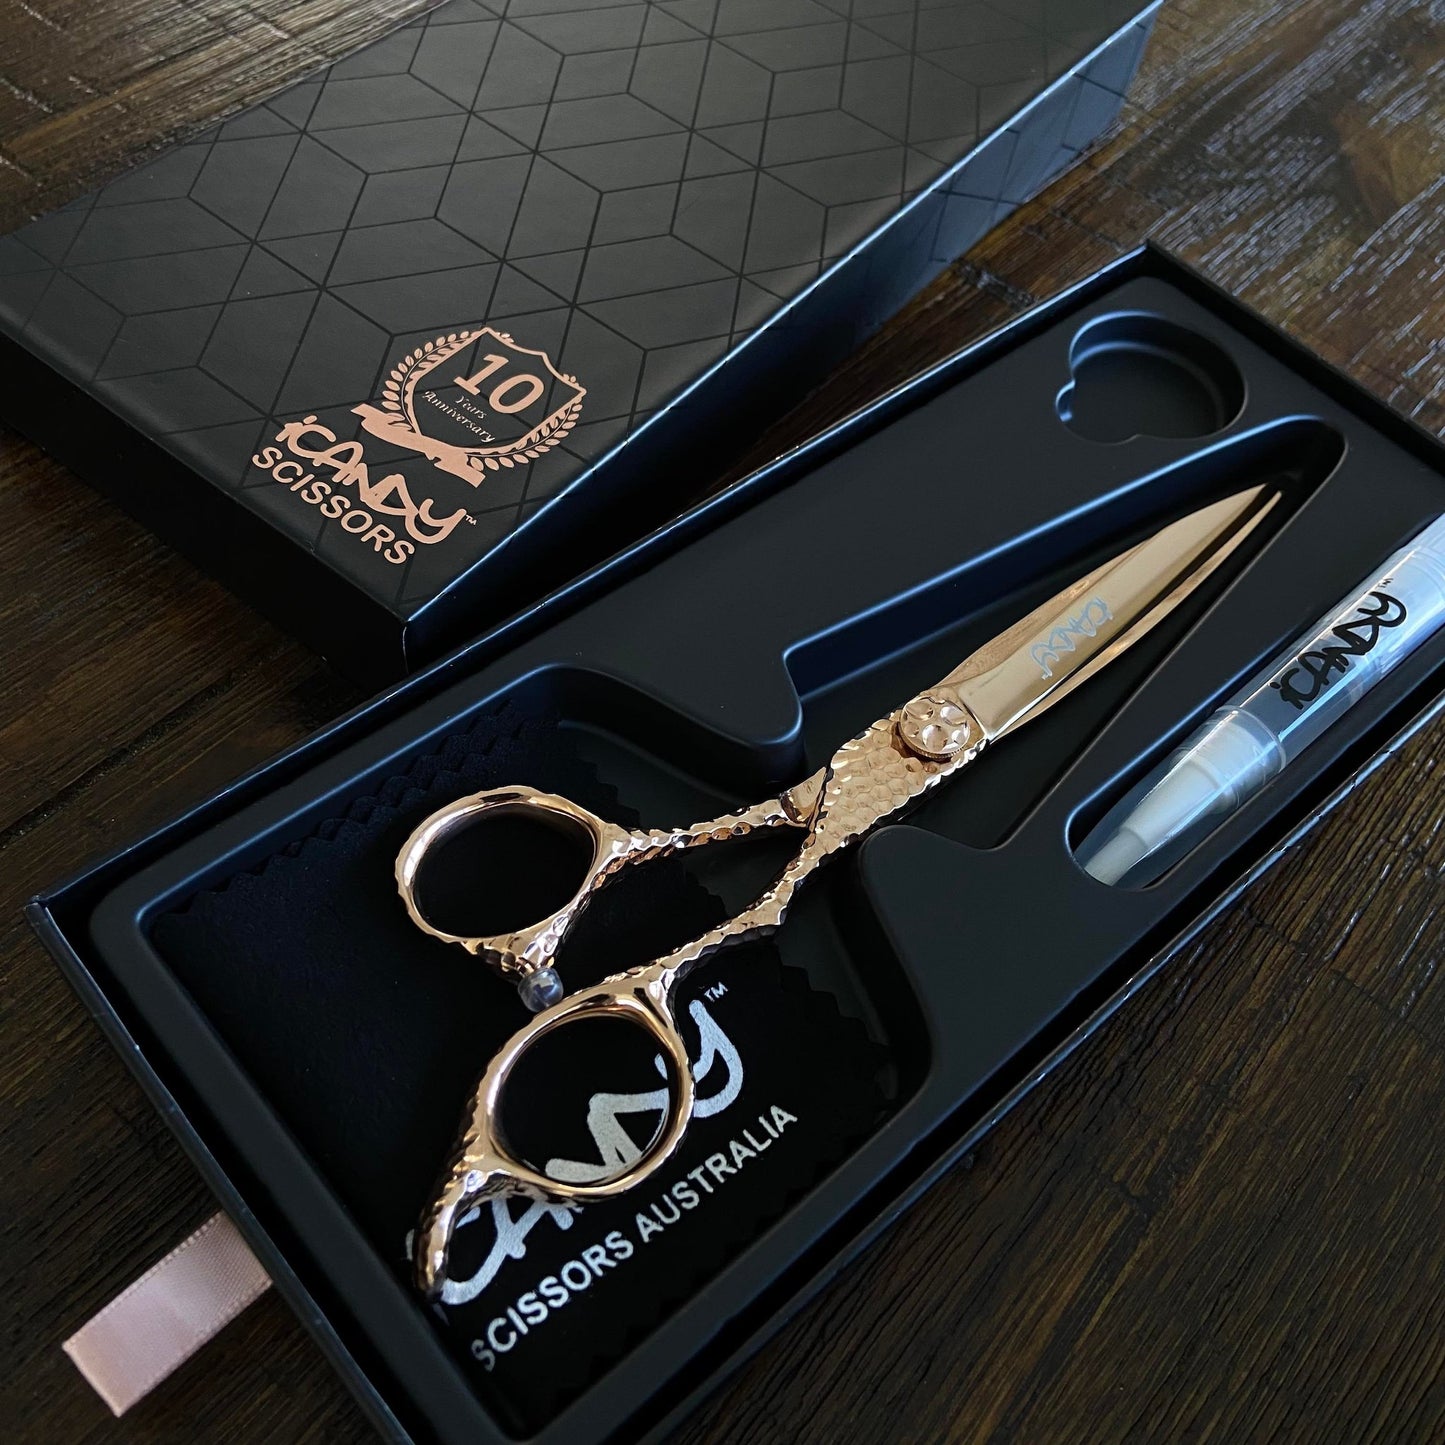 iCandy Sword Pro Rose Gold VG10 6.6" 10 Years Anniversary Edition Scissors Open Box 